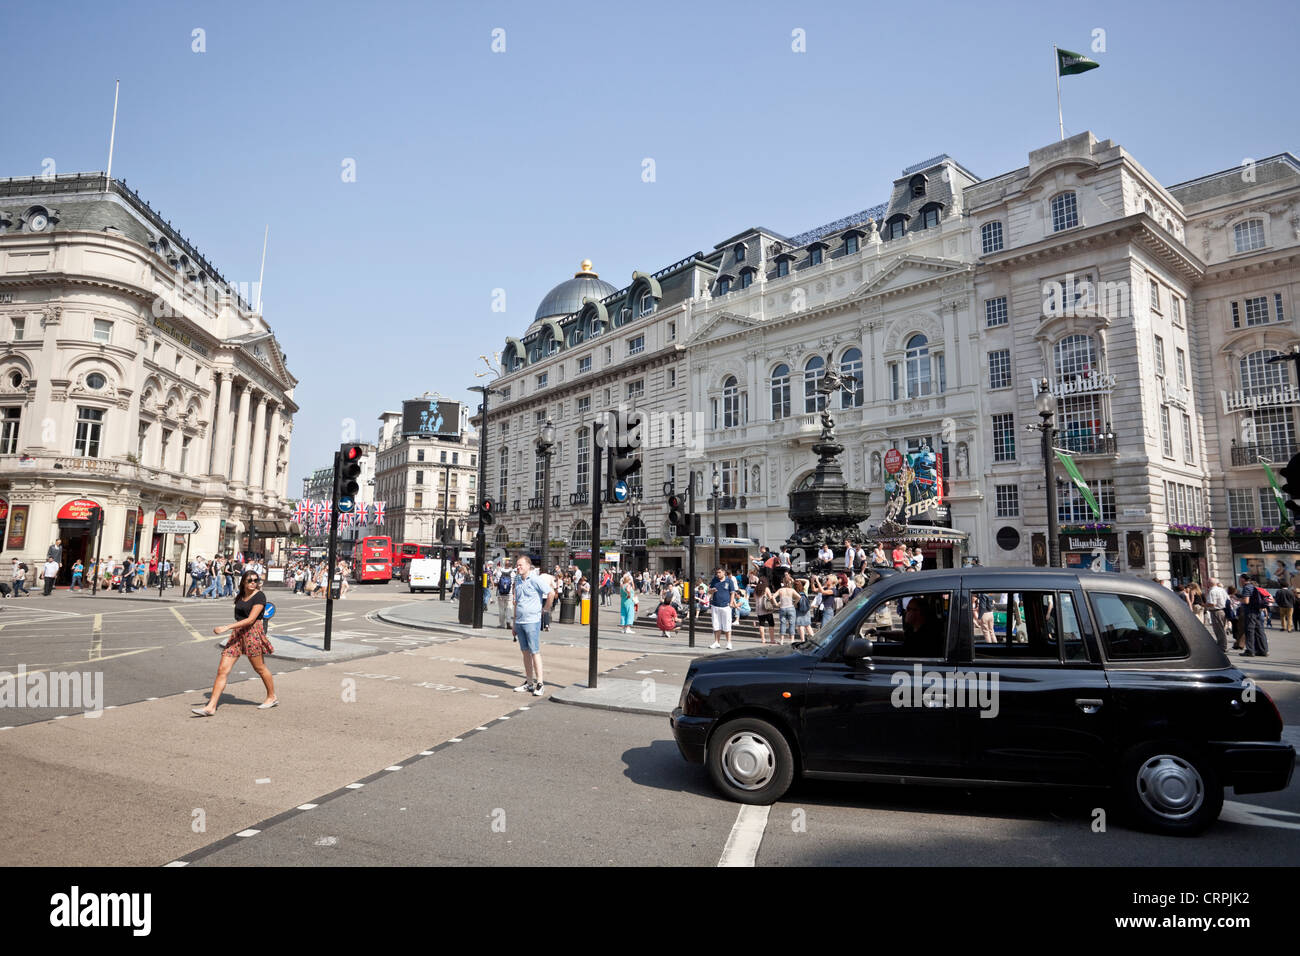 Piccadilly Circus street scene on a summer day, London, England, UK. Stock Photo